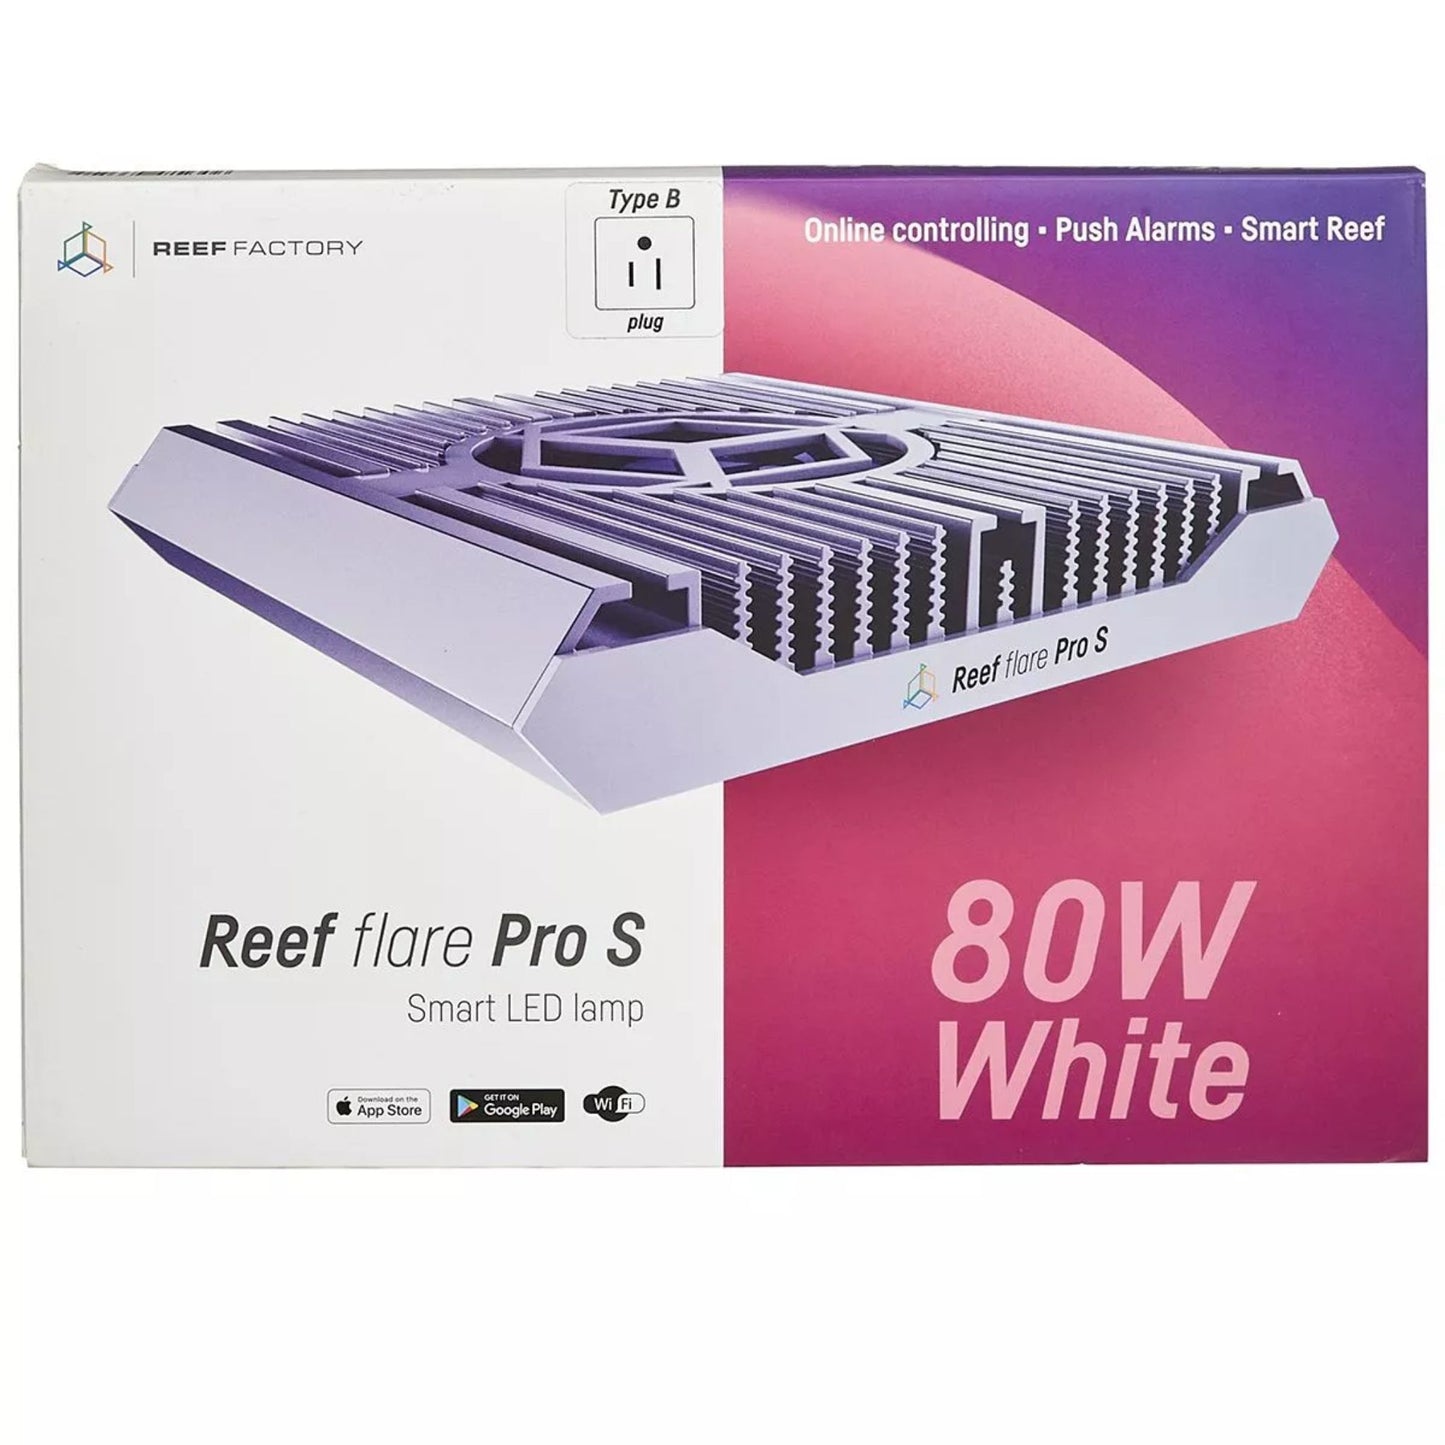 Reef Flare Pro S LED Light - Reef Factory